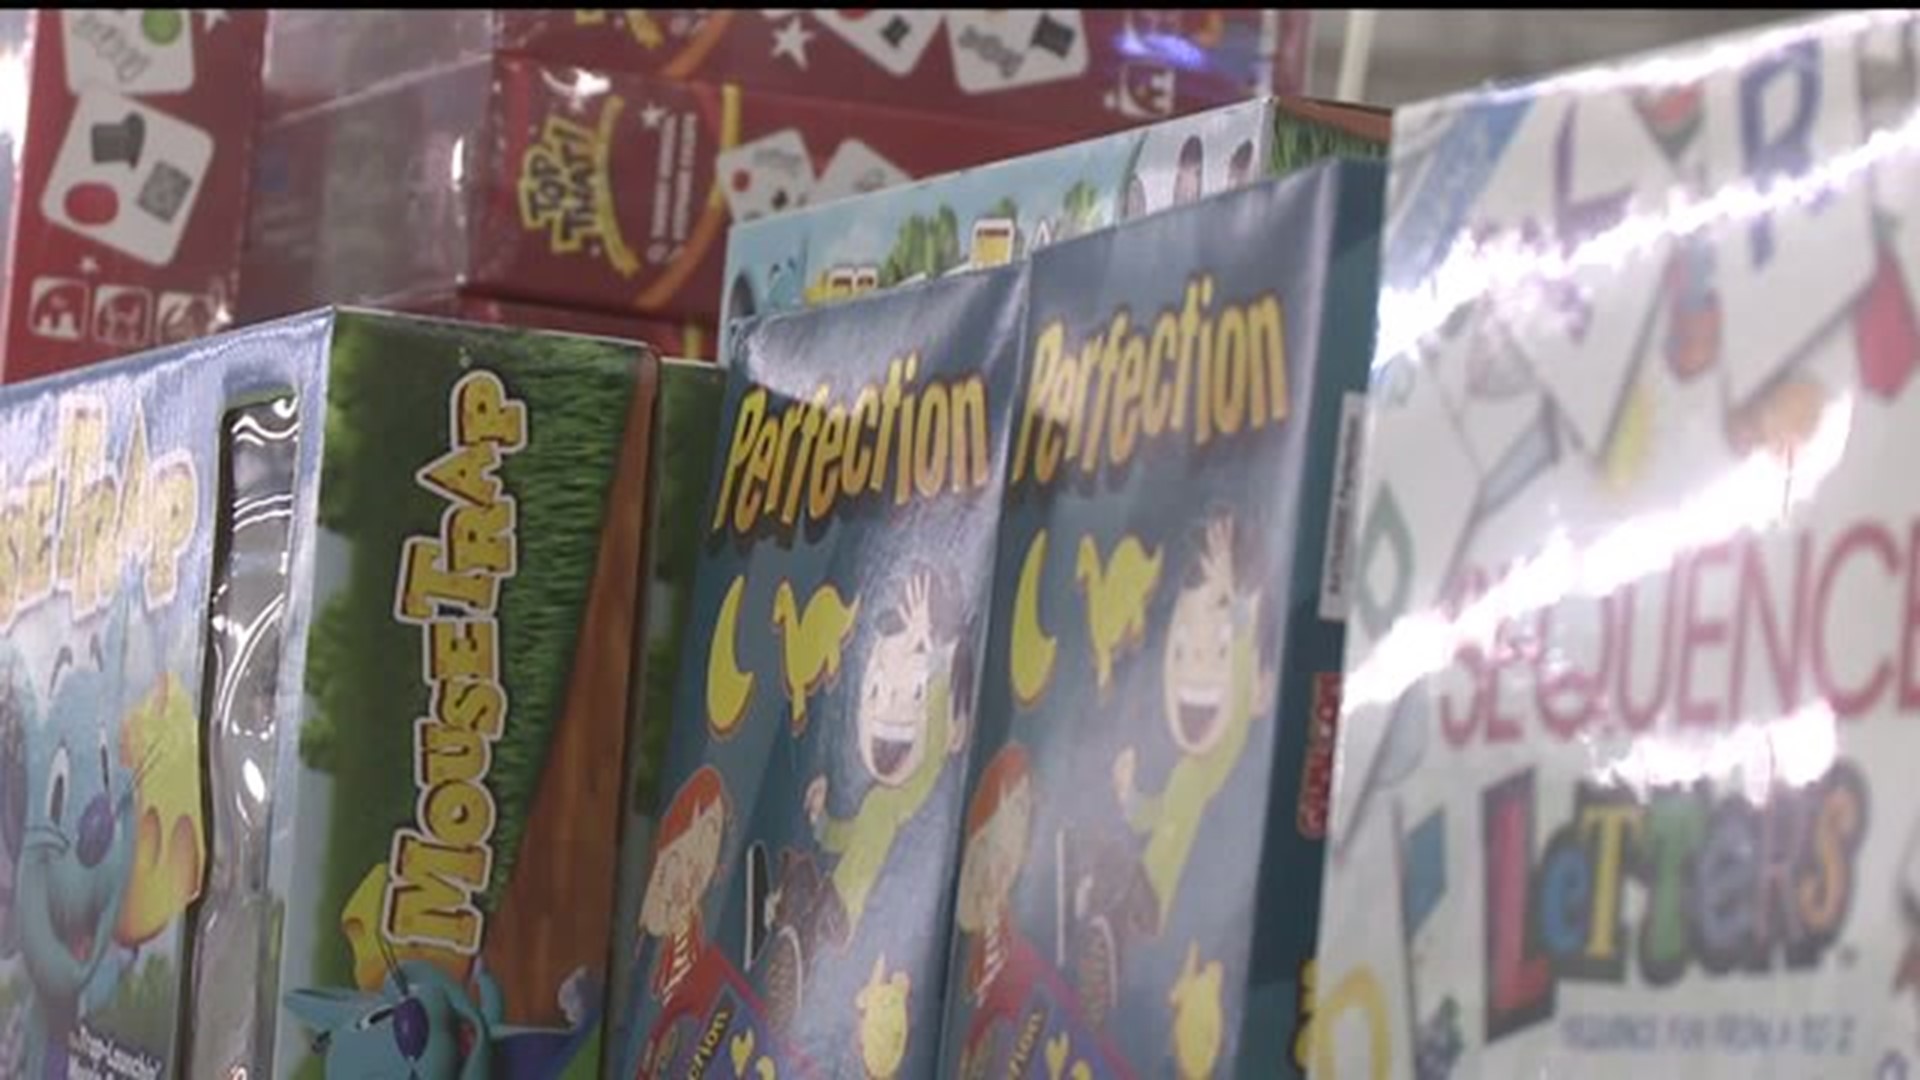 Games, puzzles needed still for Toys for Tots